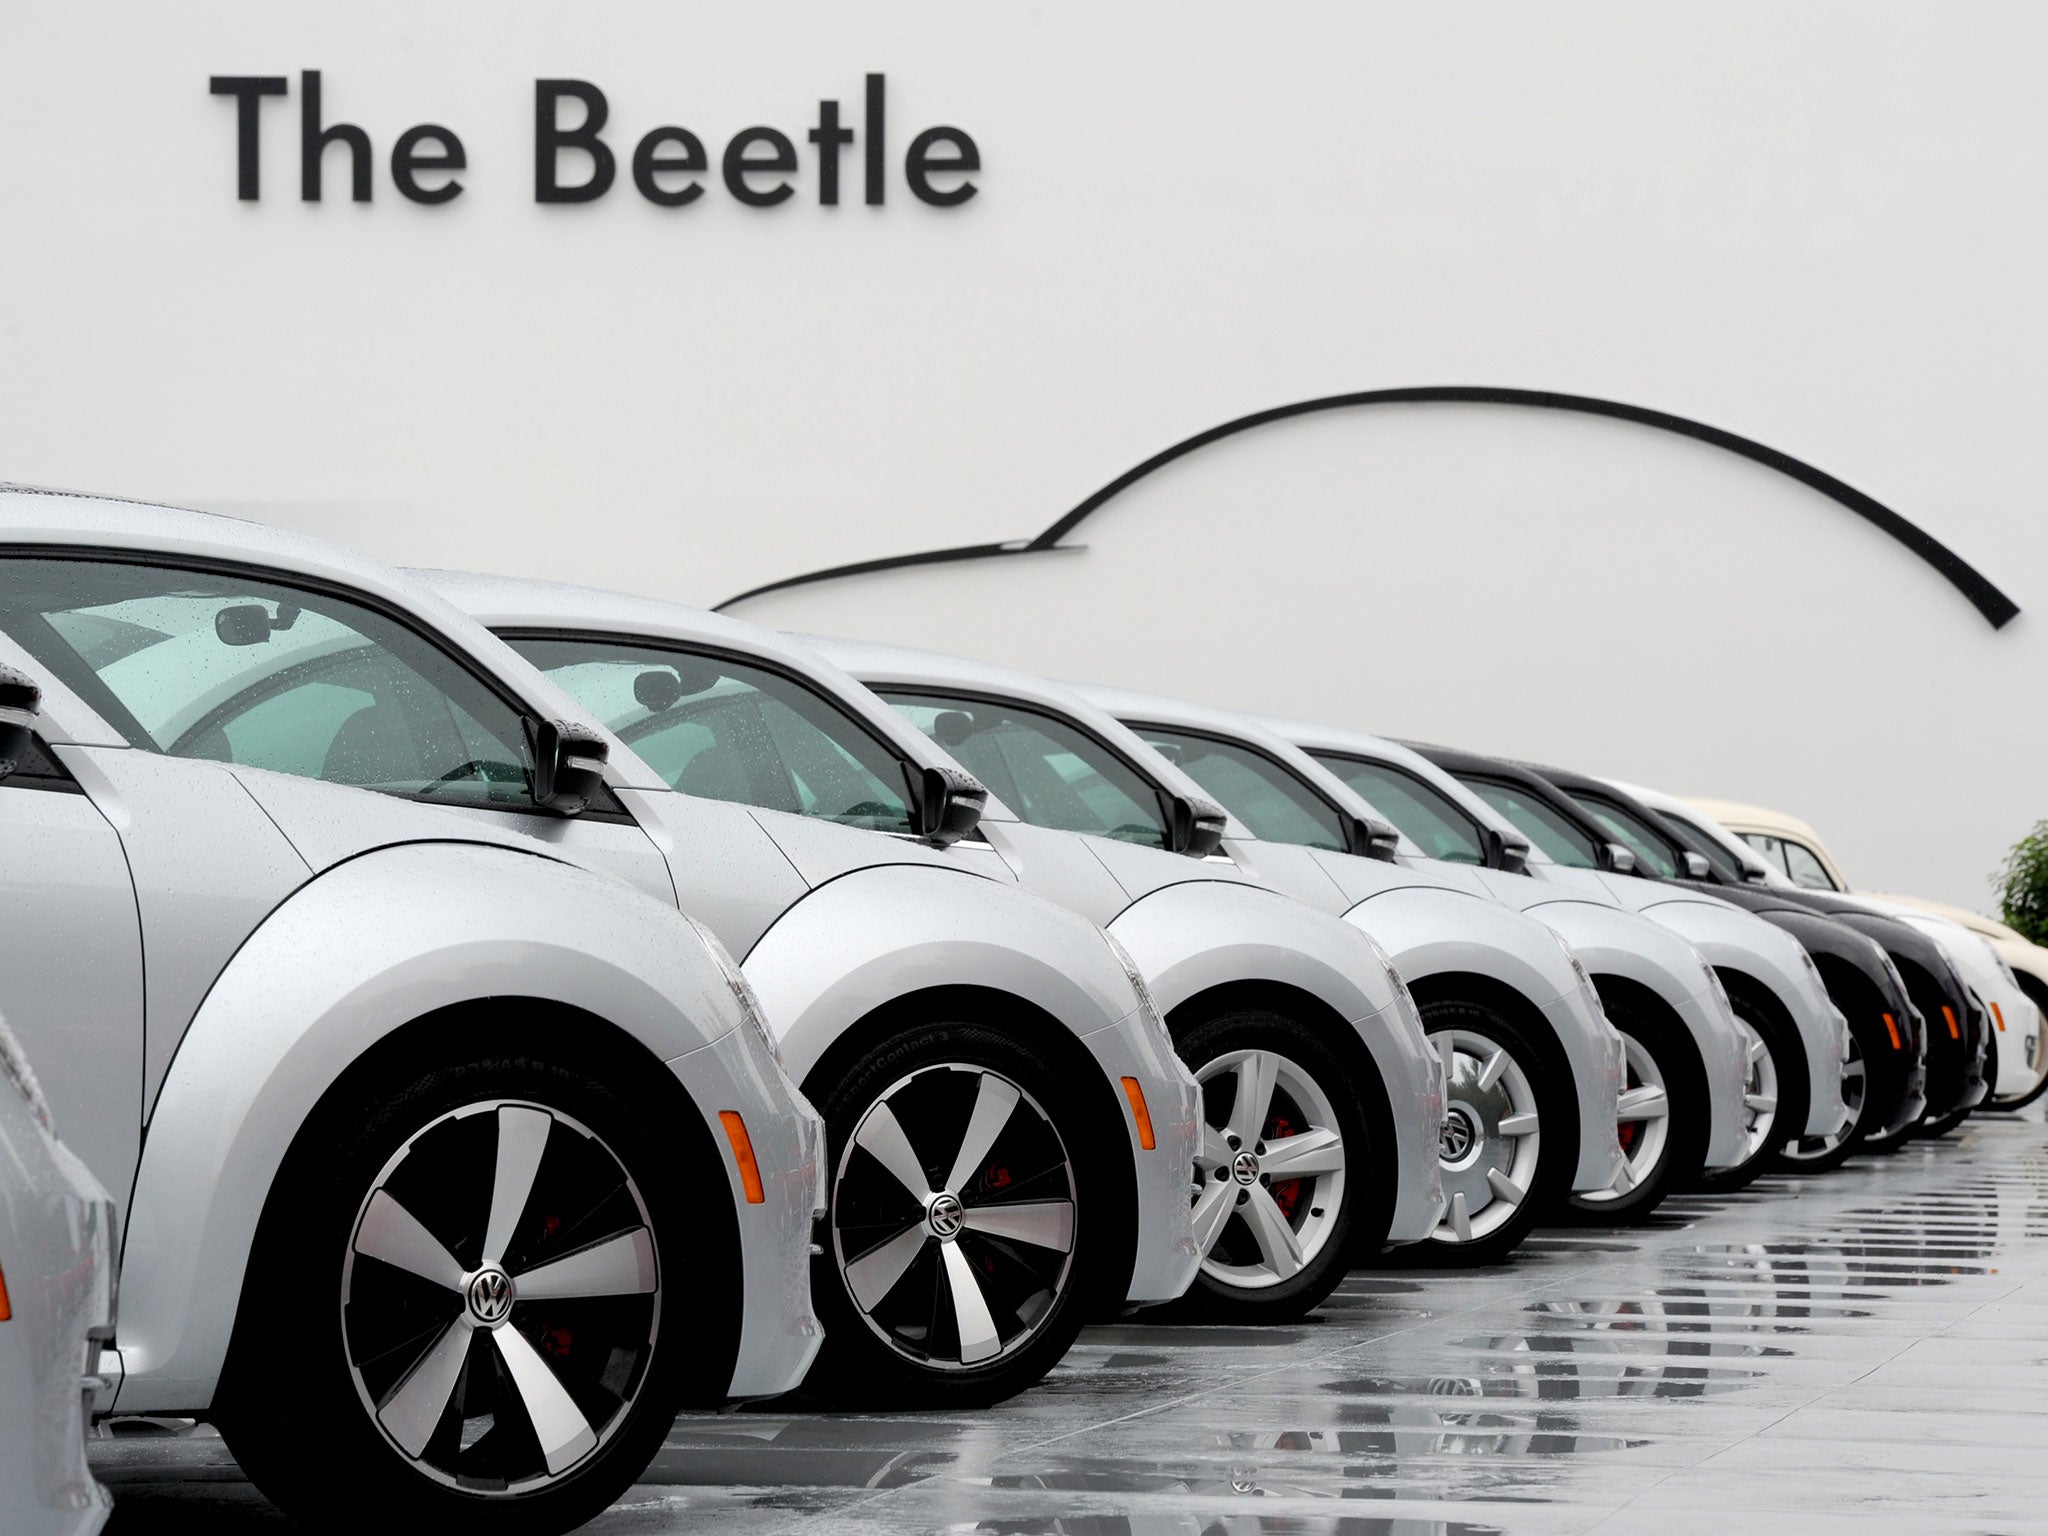 The Beetle is among the models affected